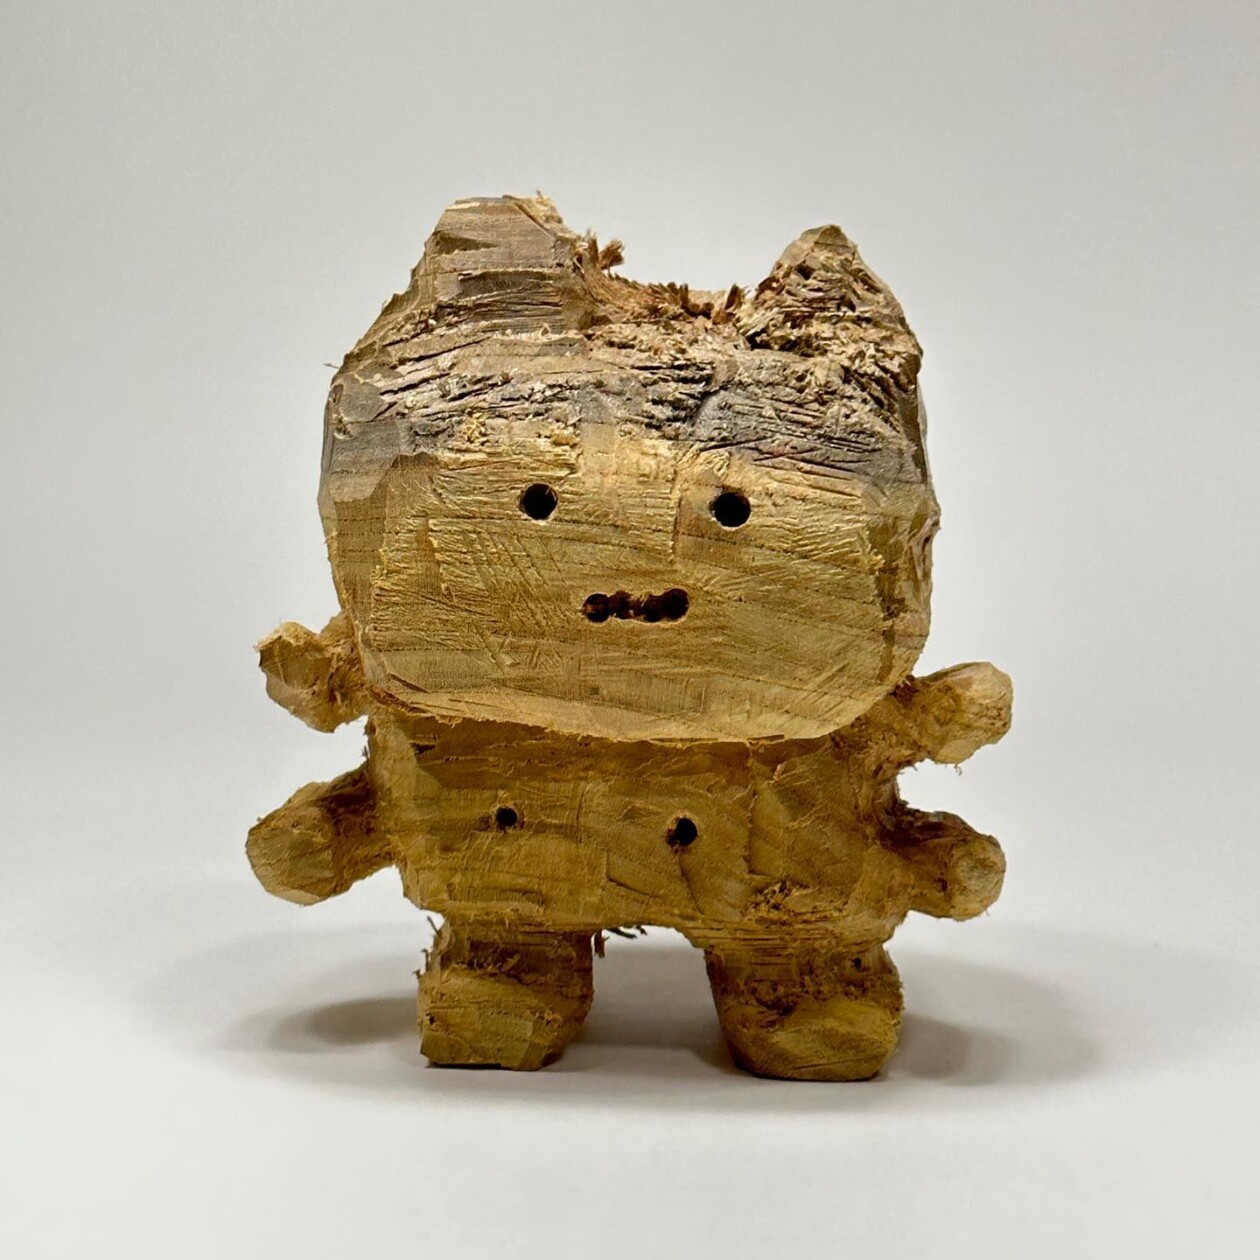 The Enchanting World Of Hirosuke Yabe's Wooden Beings (2)